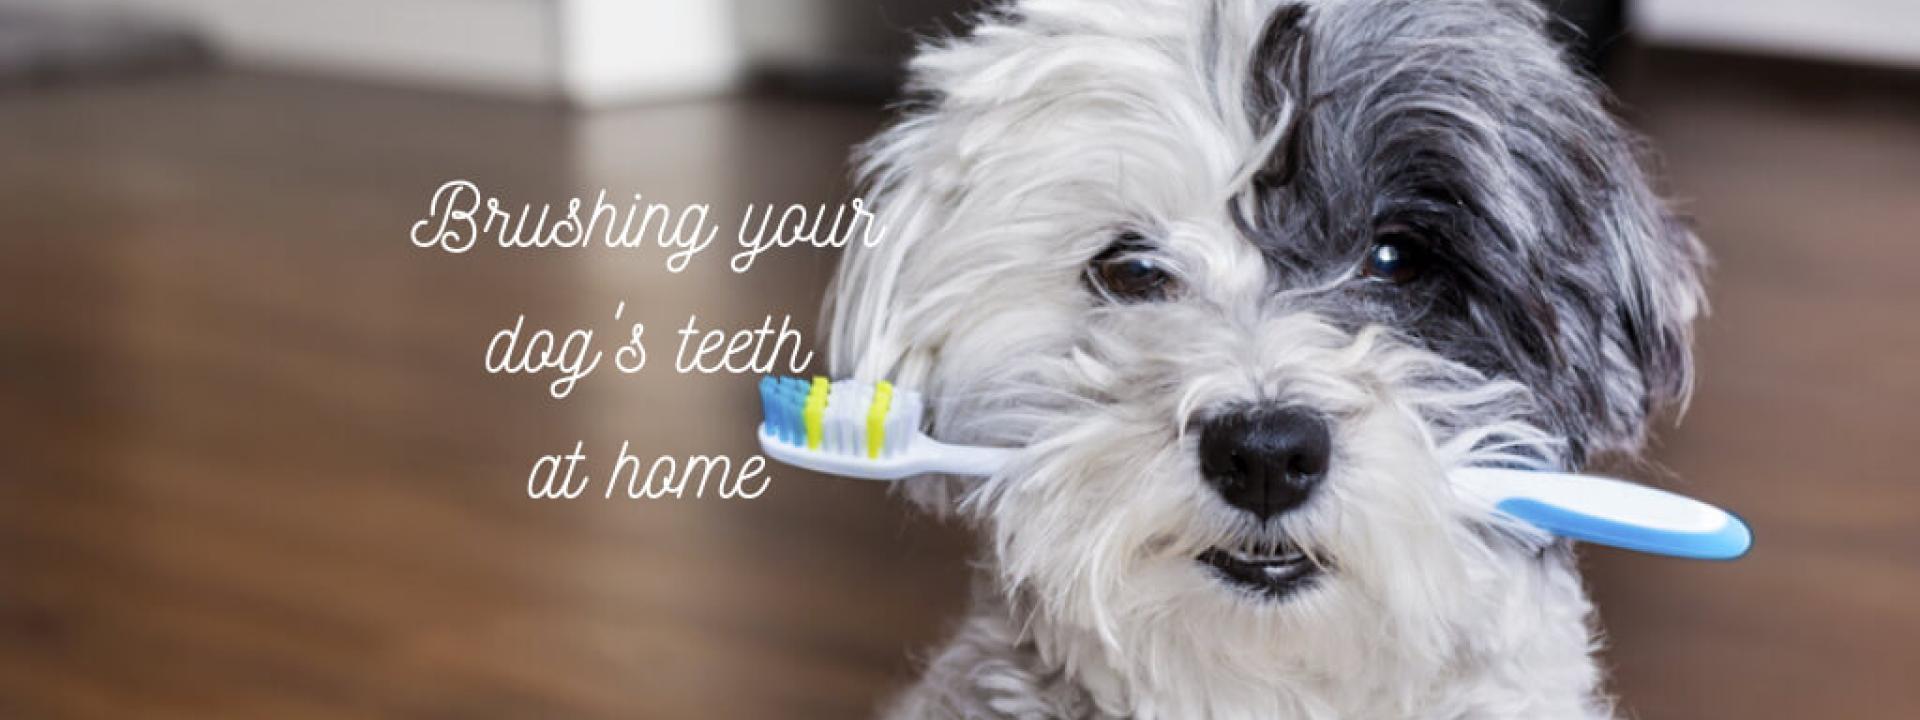 brushing-your-dogs-teeth-at-home.jpg